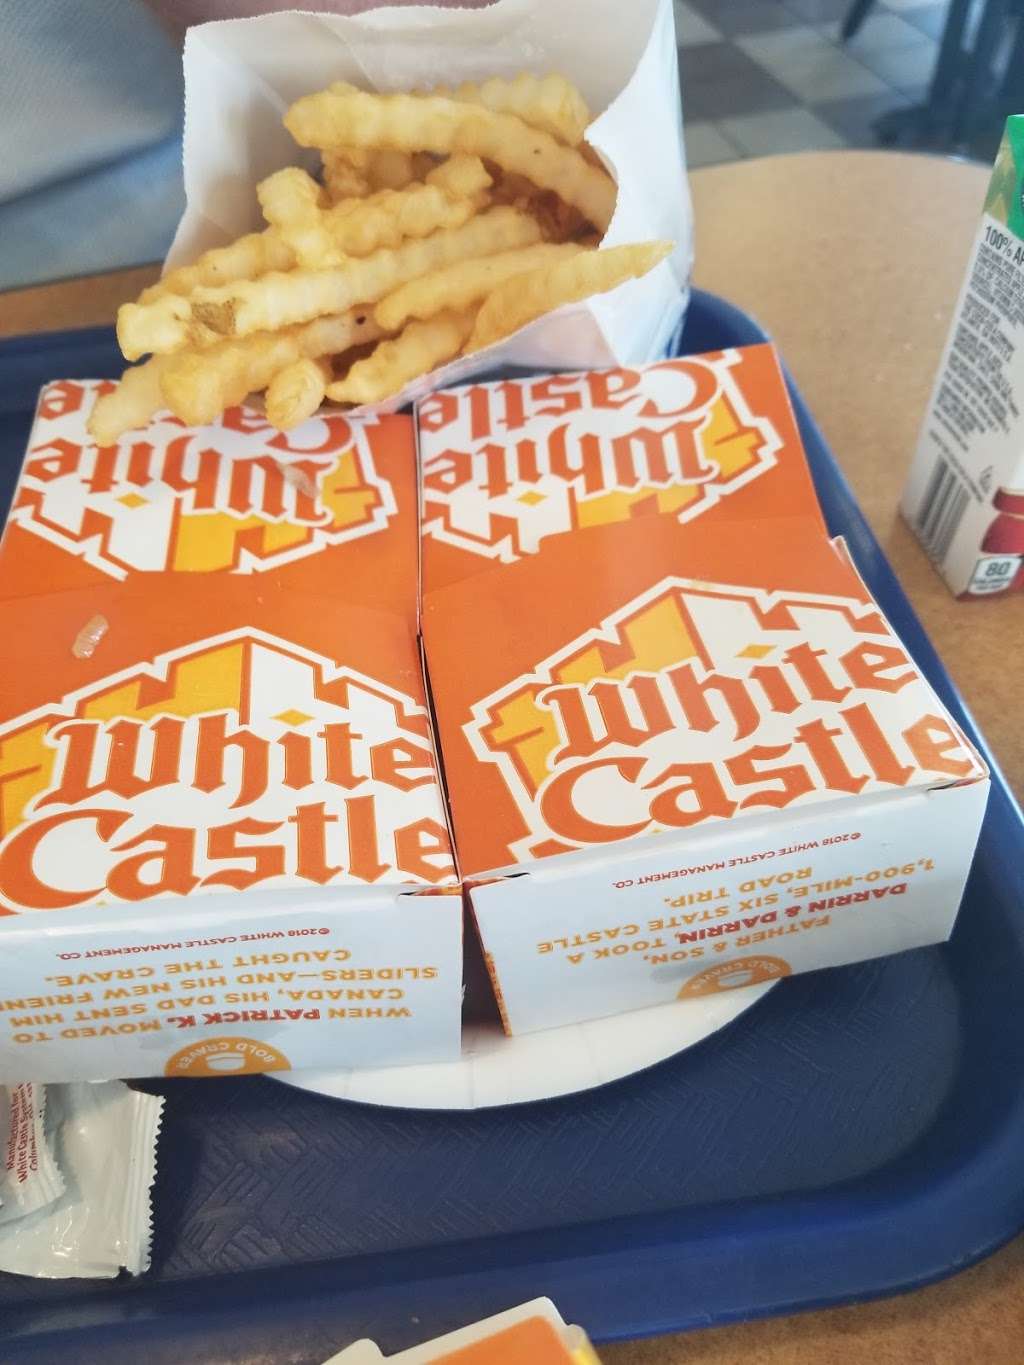 White Castle | 440 Ridge Rd, Griffith, IN 46319 | Phone: (219) 838-2044